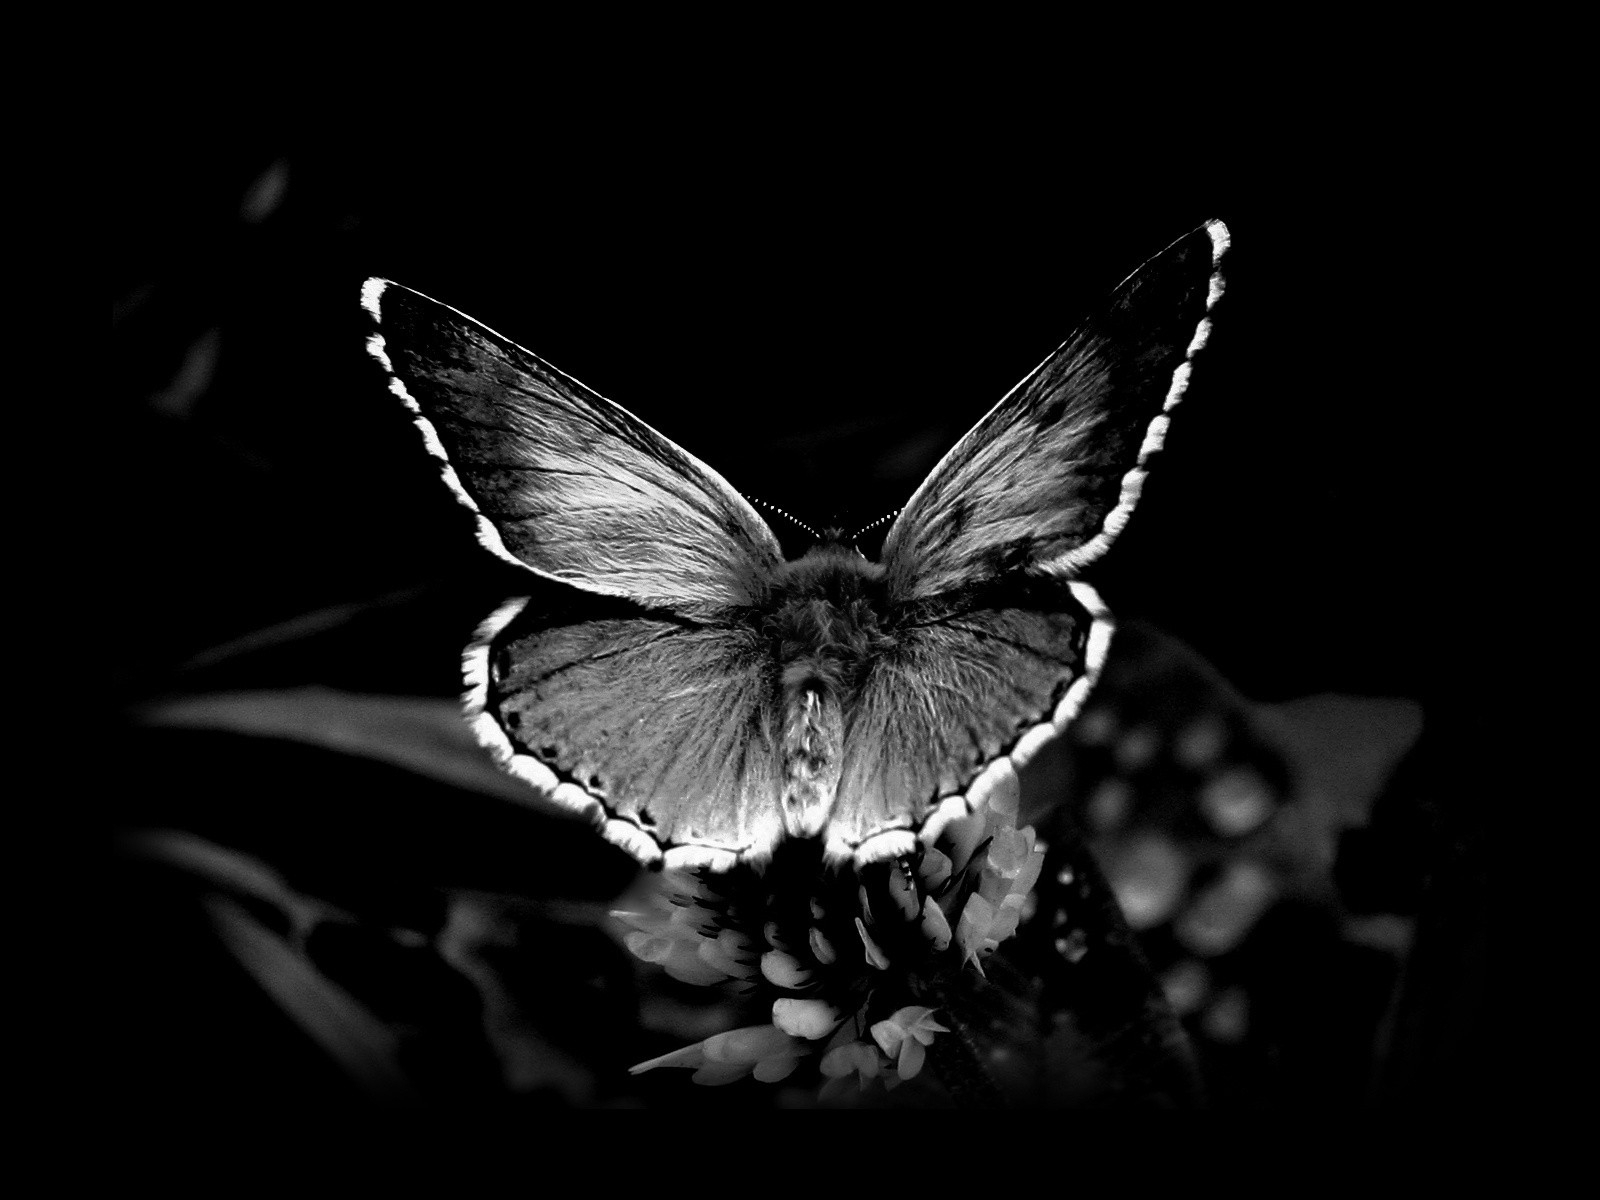 Animal Black Amp White Butterfly Wings 1600x1200